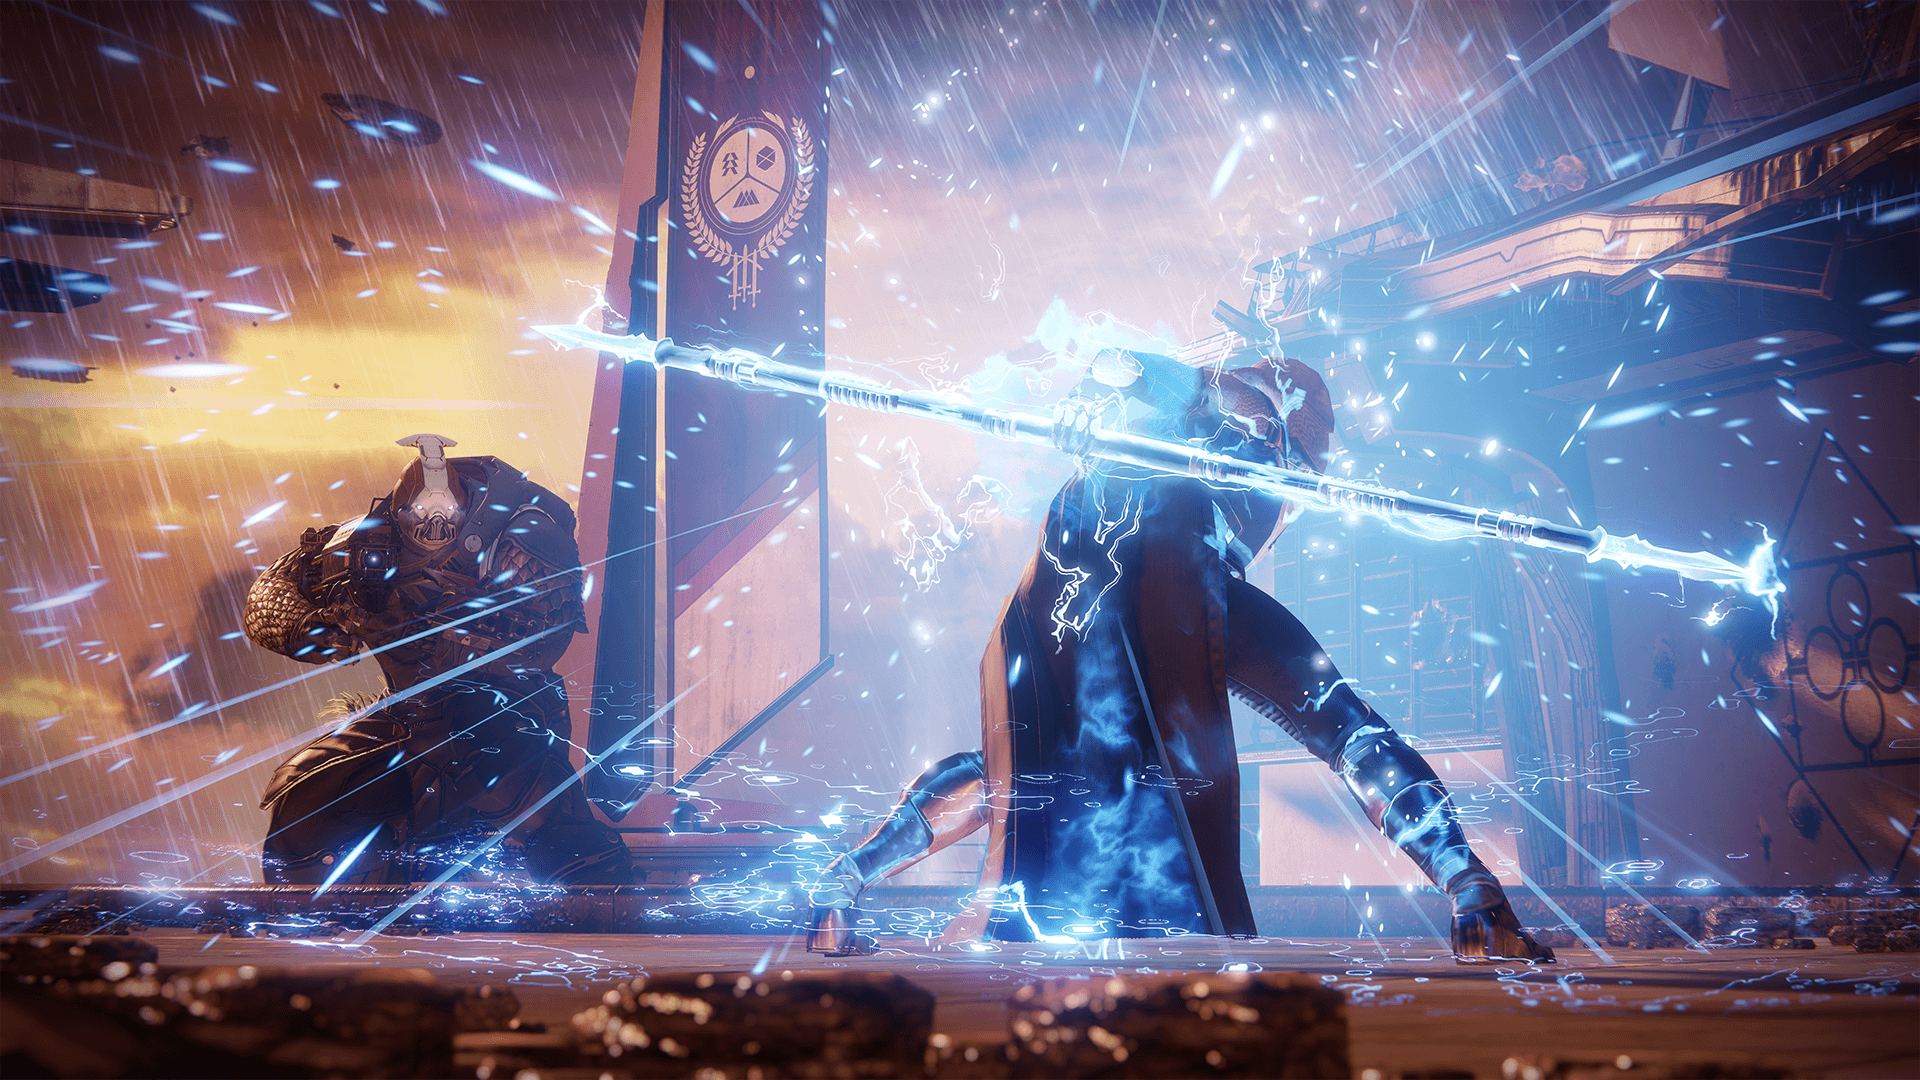 Destiny 2 Annual Pass Adds New Content And Activities Through Summer